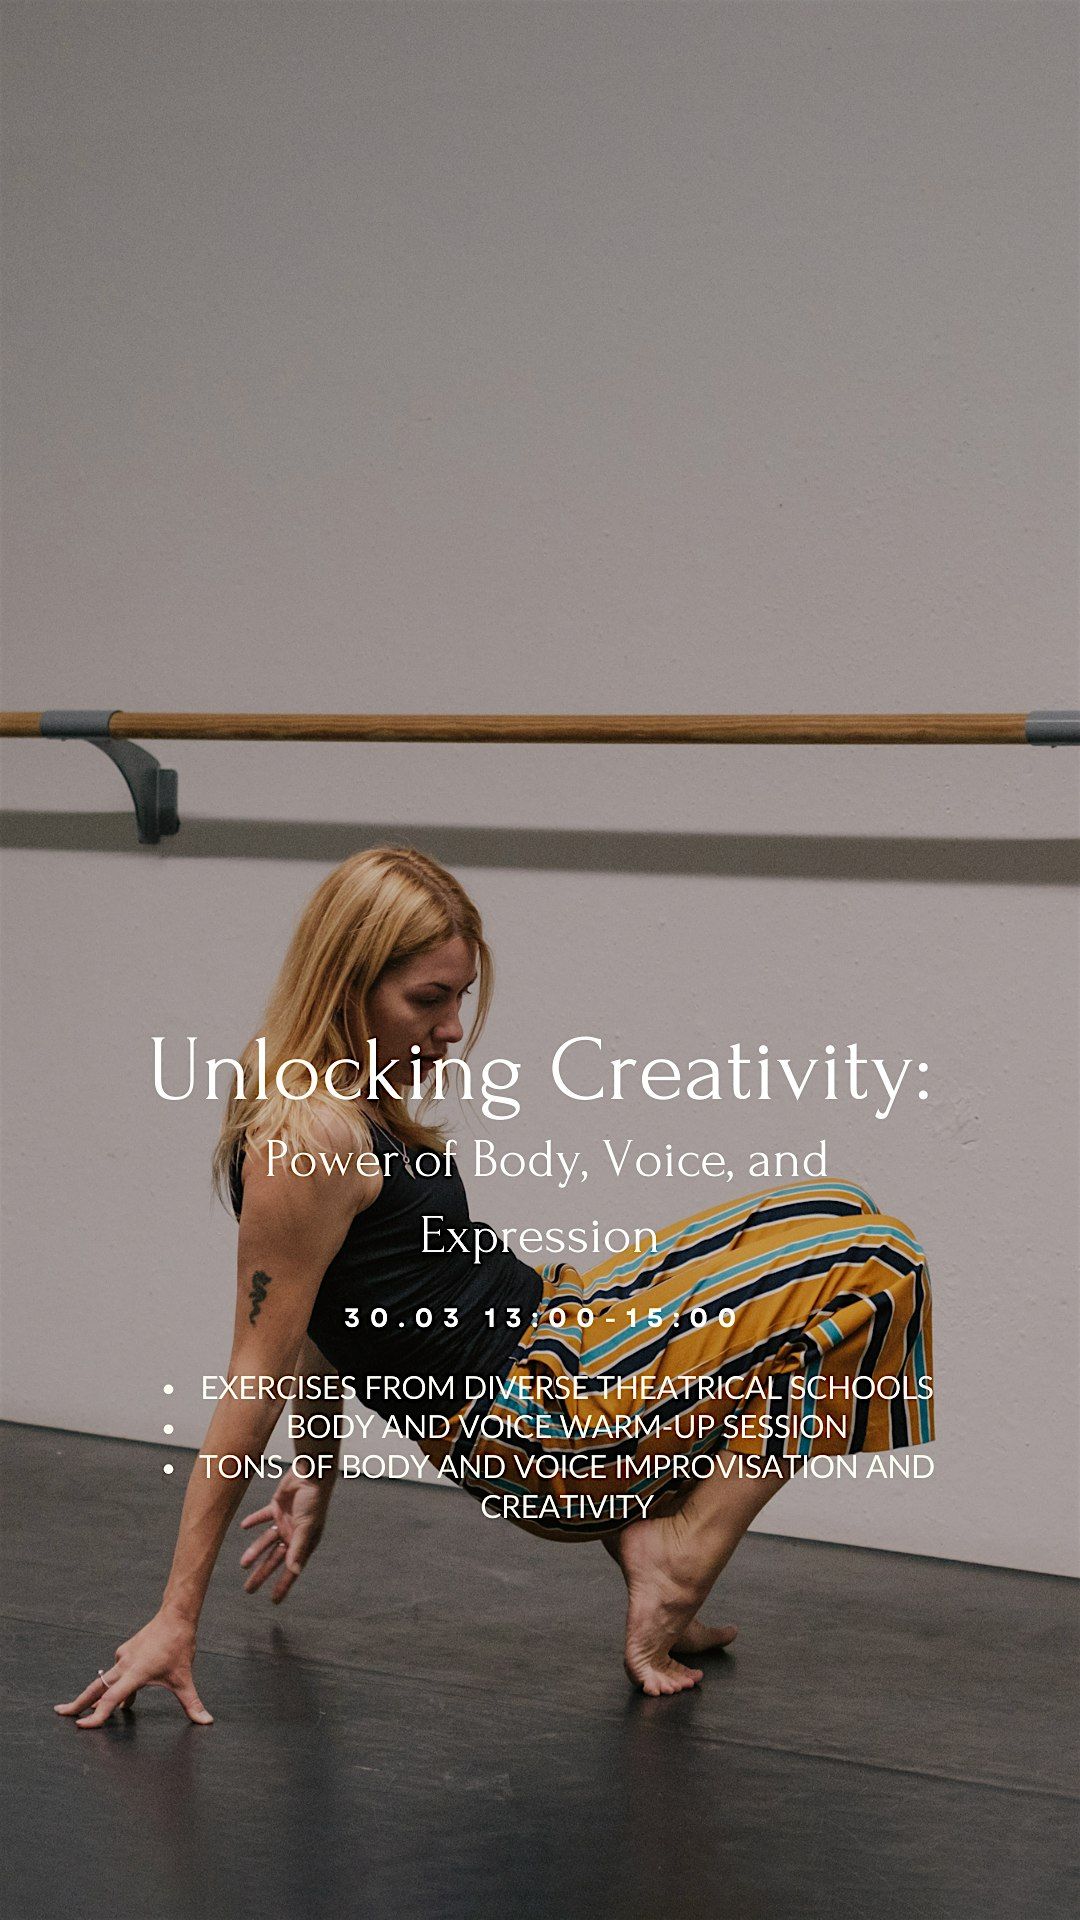 Unlocking Creativity: Power of Body, Voice, and Expression